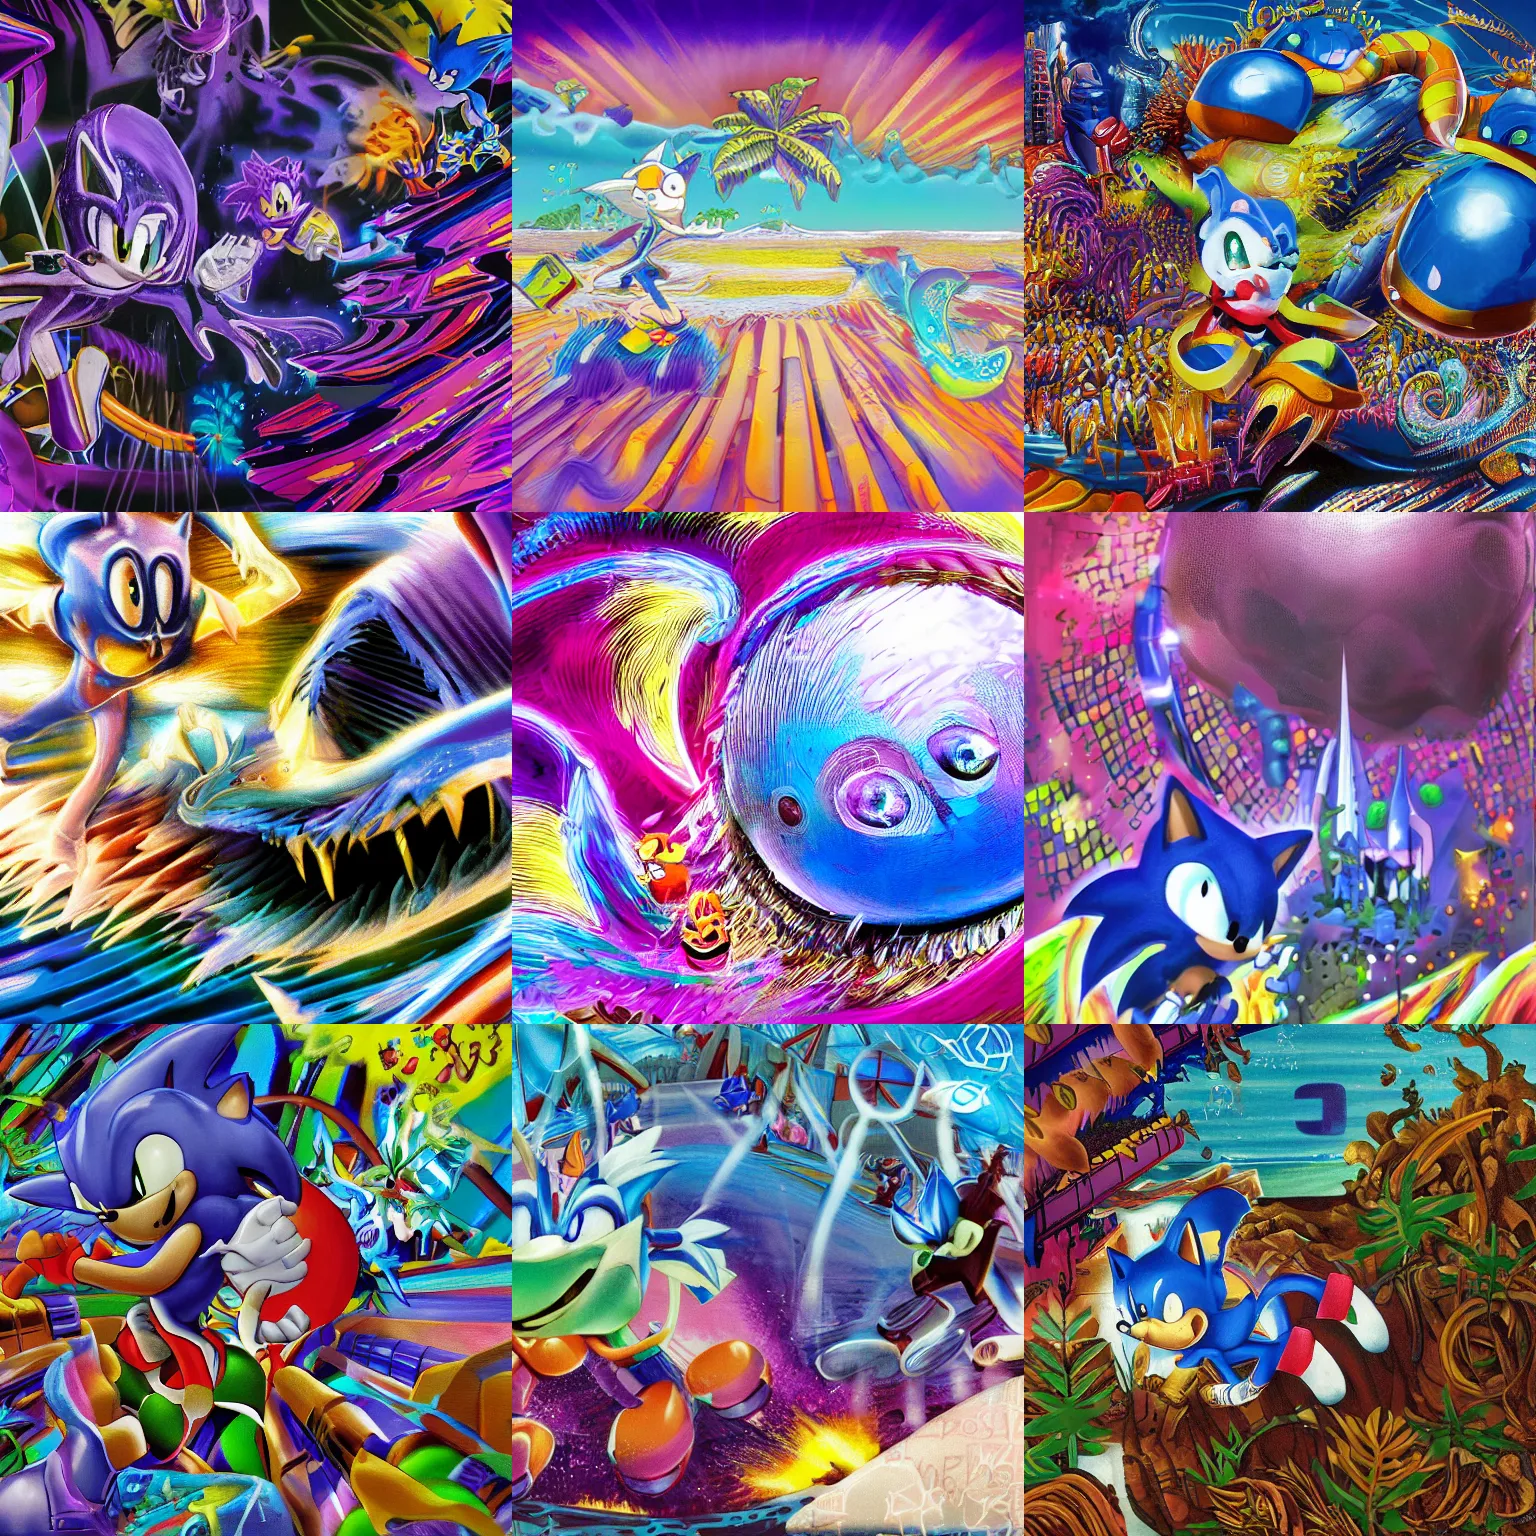 Prompt: surreal closeup of sonic, sharp, detailed professional, high quality airbrush art MGMT album cover of a liquid dissolving LSD DMT blue sonic the hedgehog surfing through cyberspace, tropical ocean, purple checkerboard background, 1980s 1985 Sega arcade video game album cover